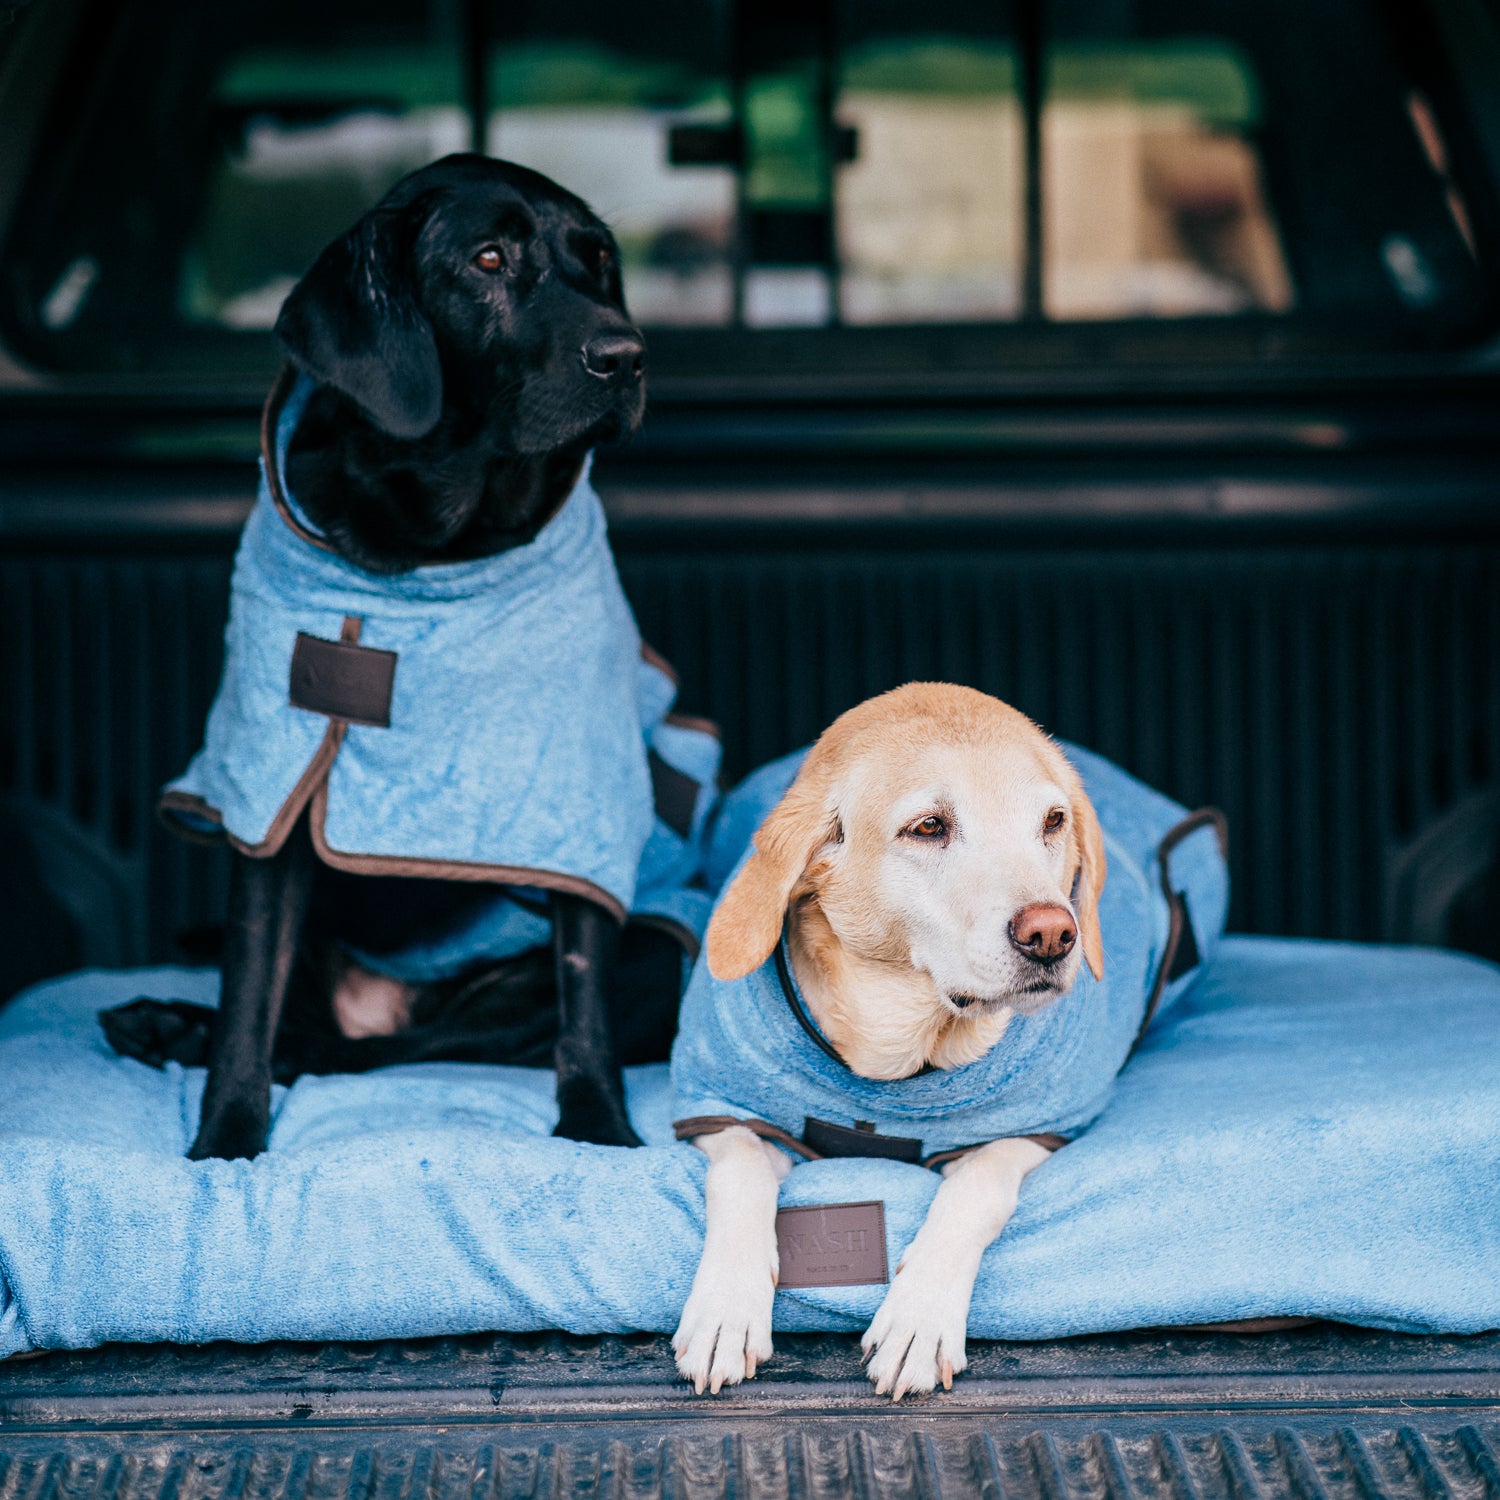 Two Labradors in the boot of a car resting on a NASH Cambridge blue dog bed cover & bed, wearing matching bamboo dog drying coats.